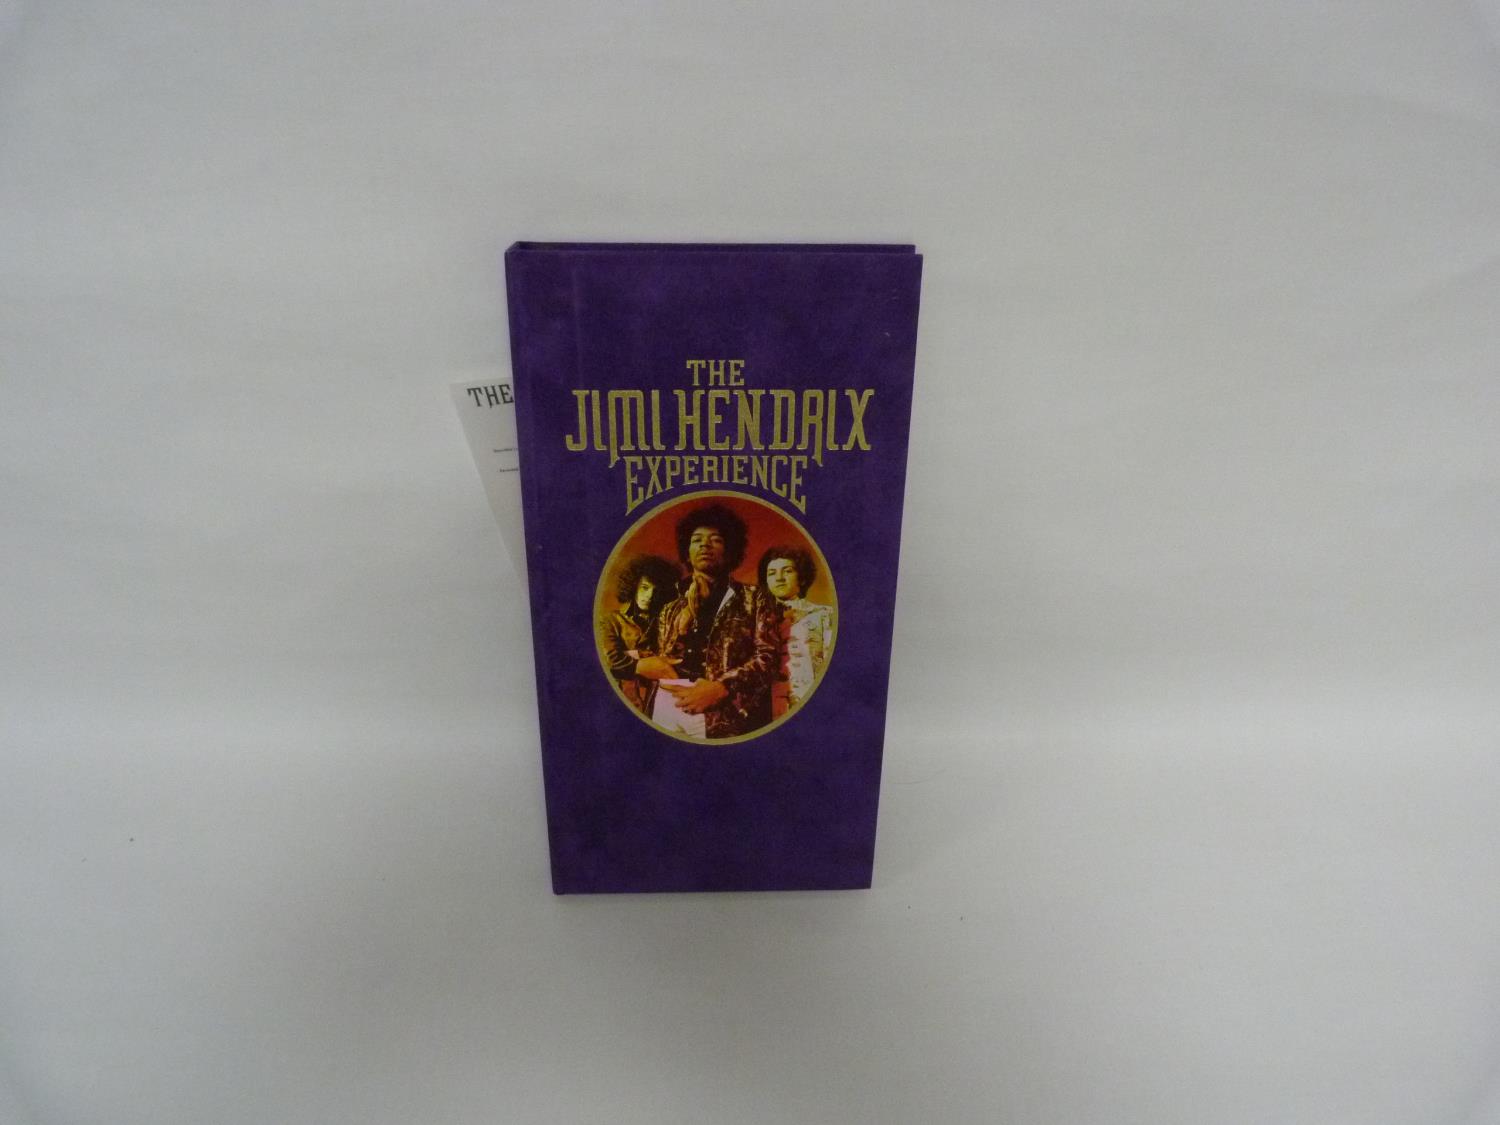 The Jimi Hendrix Experience, 4 CD set in purple velvet sleeve. Manufactured in 2000, made in the EU. - Image 2 of 3